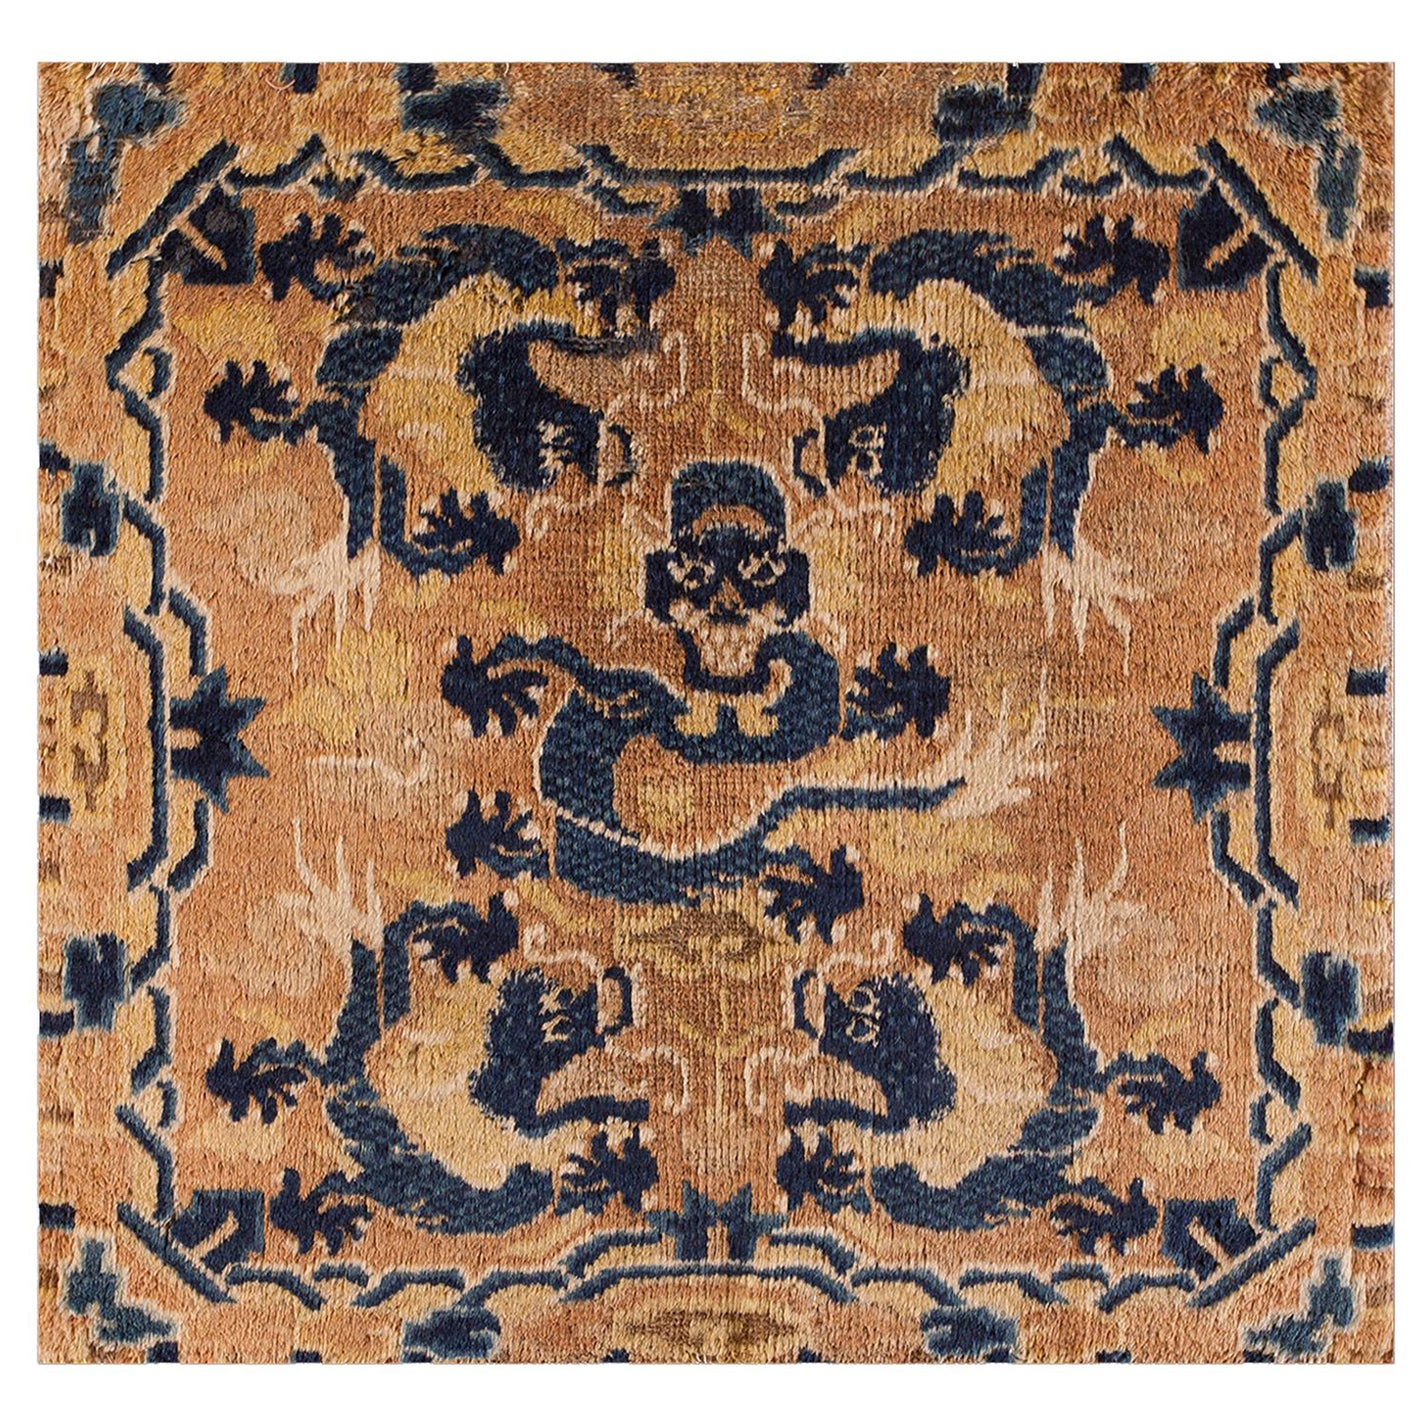 Mid 19th Century Chinese Ningxia Throne Back Rug ( 2' 3" x 2' 3" - 68 x 68 ) For Sale